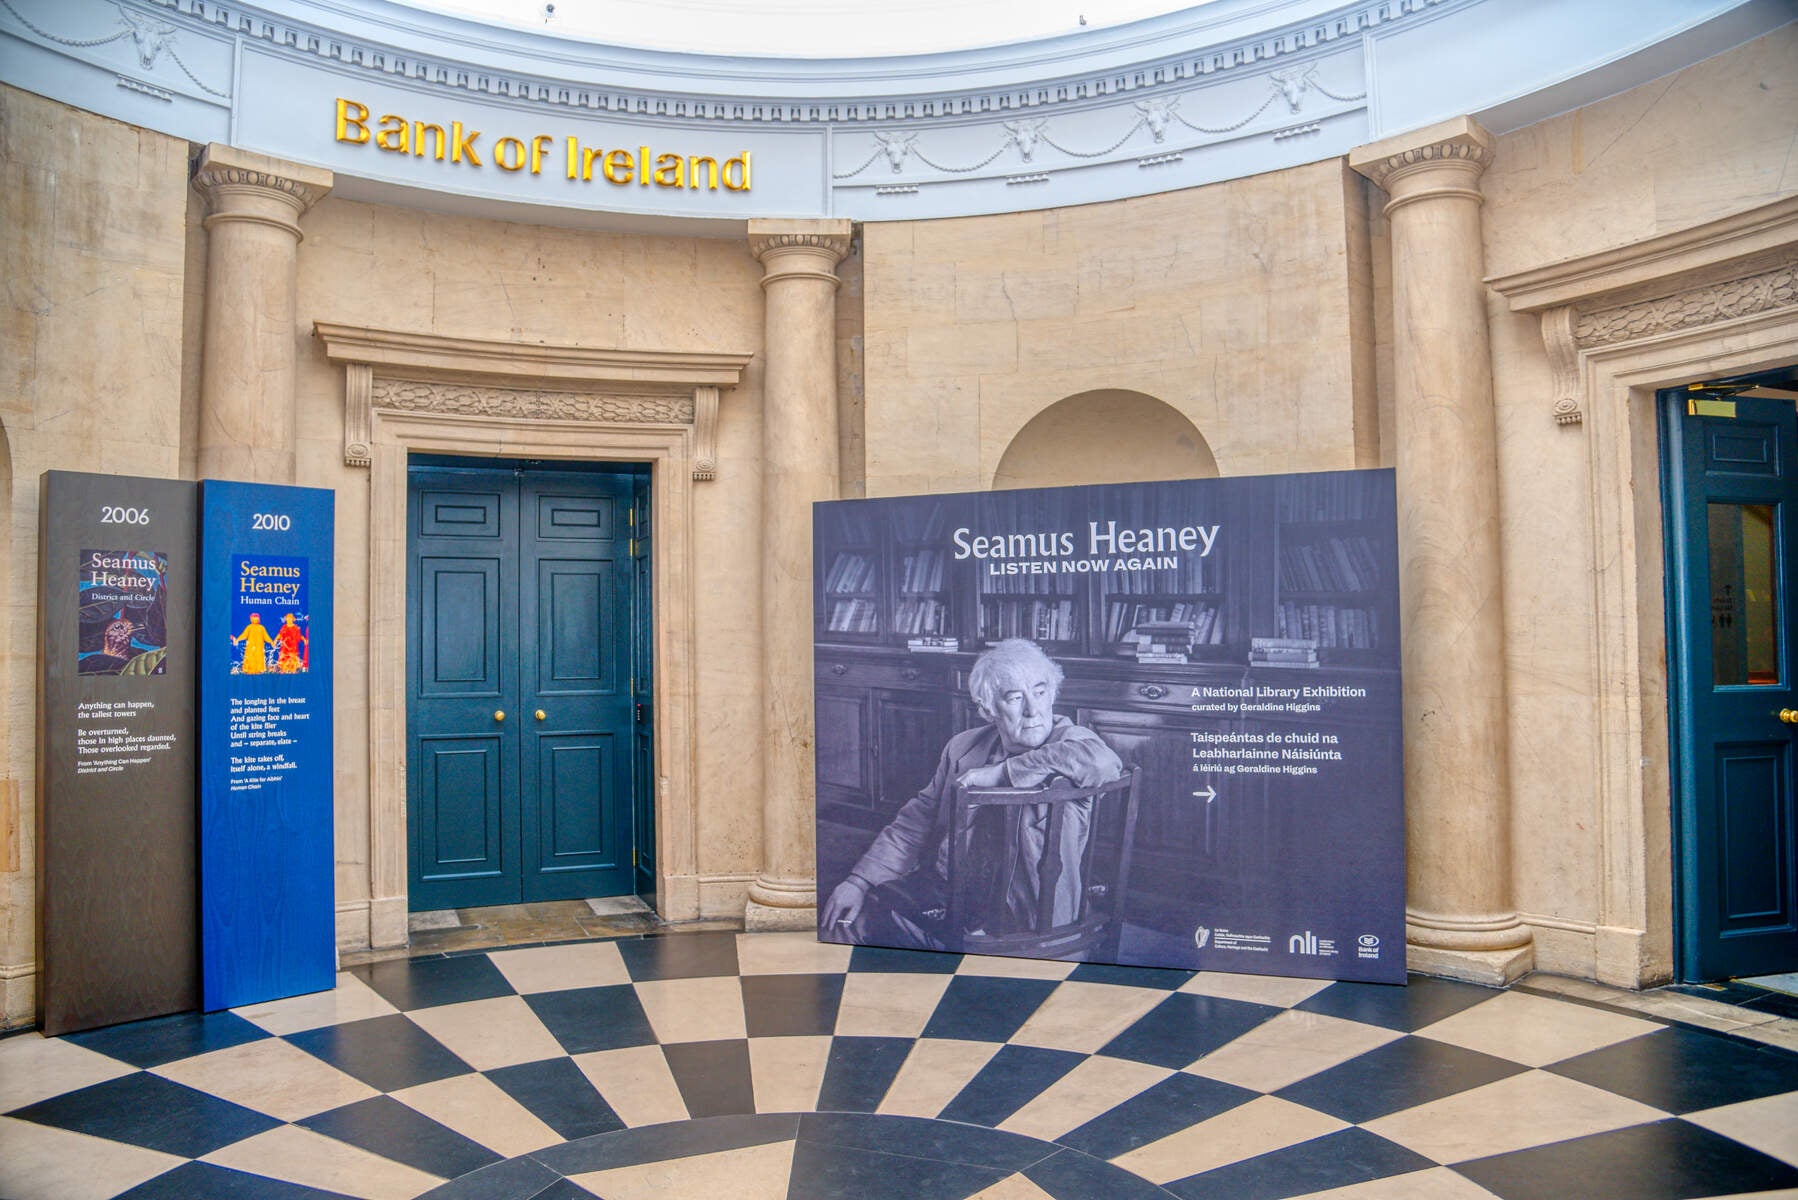 The entrance of the Seamus Heaney: Listen Now Again exhibition at the Bank of Ireland Cultural and Heritage Centre in Dublin.